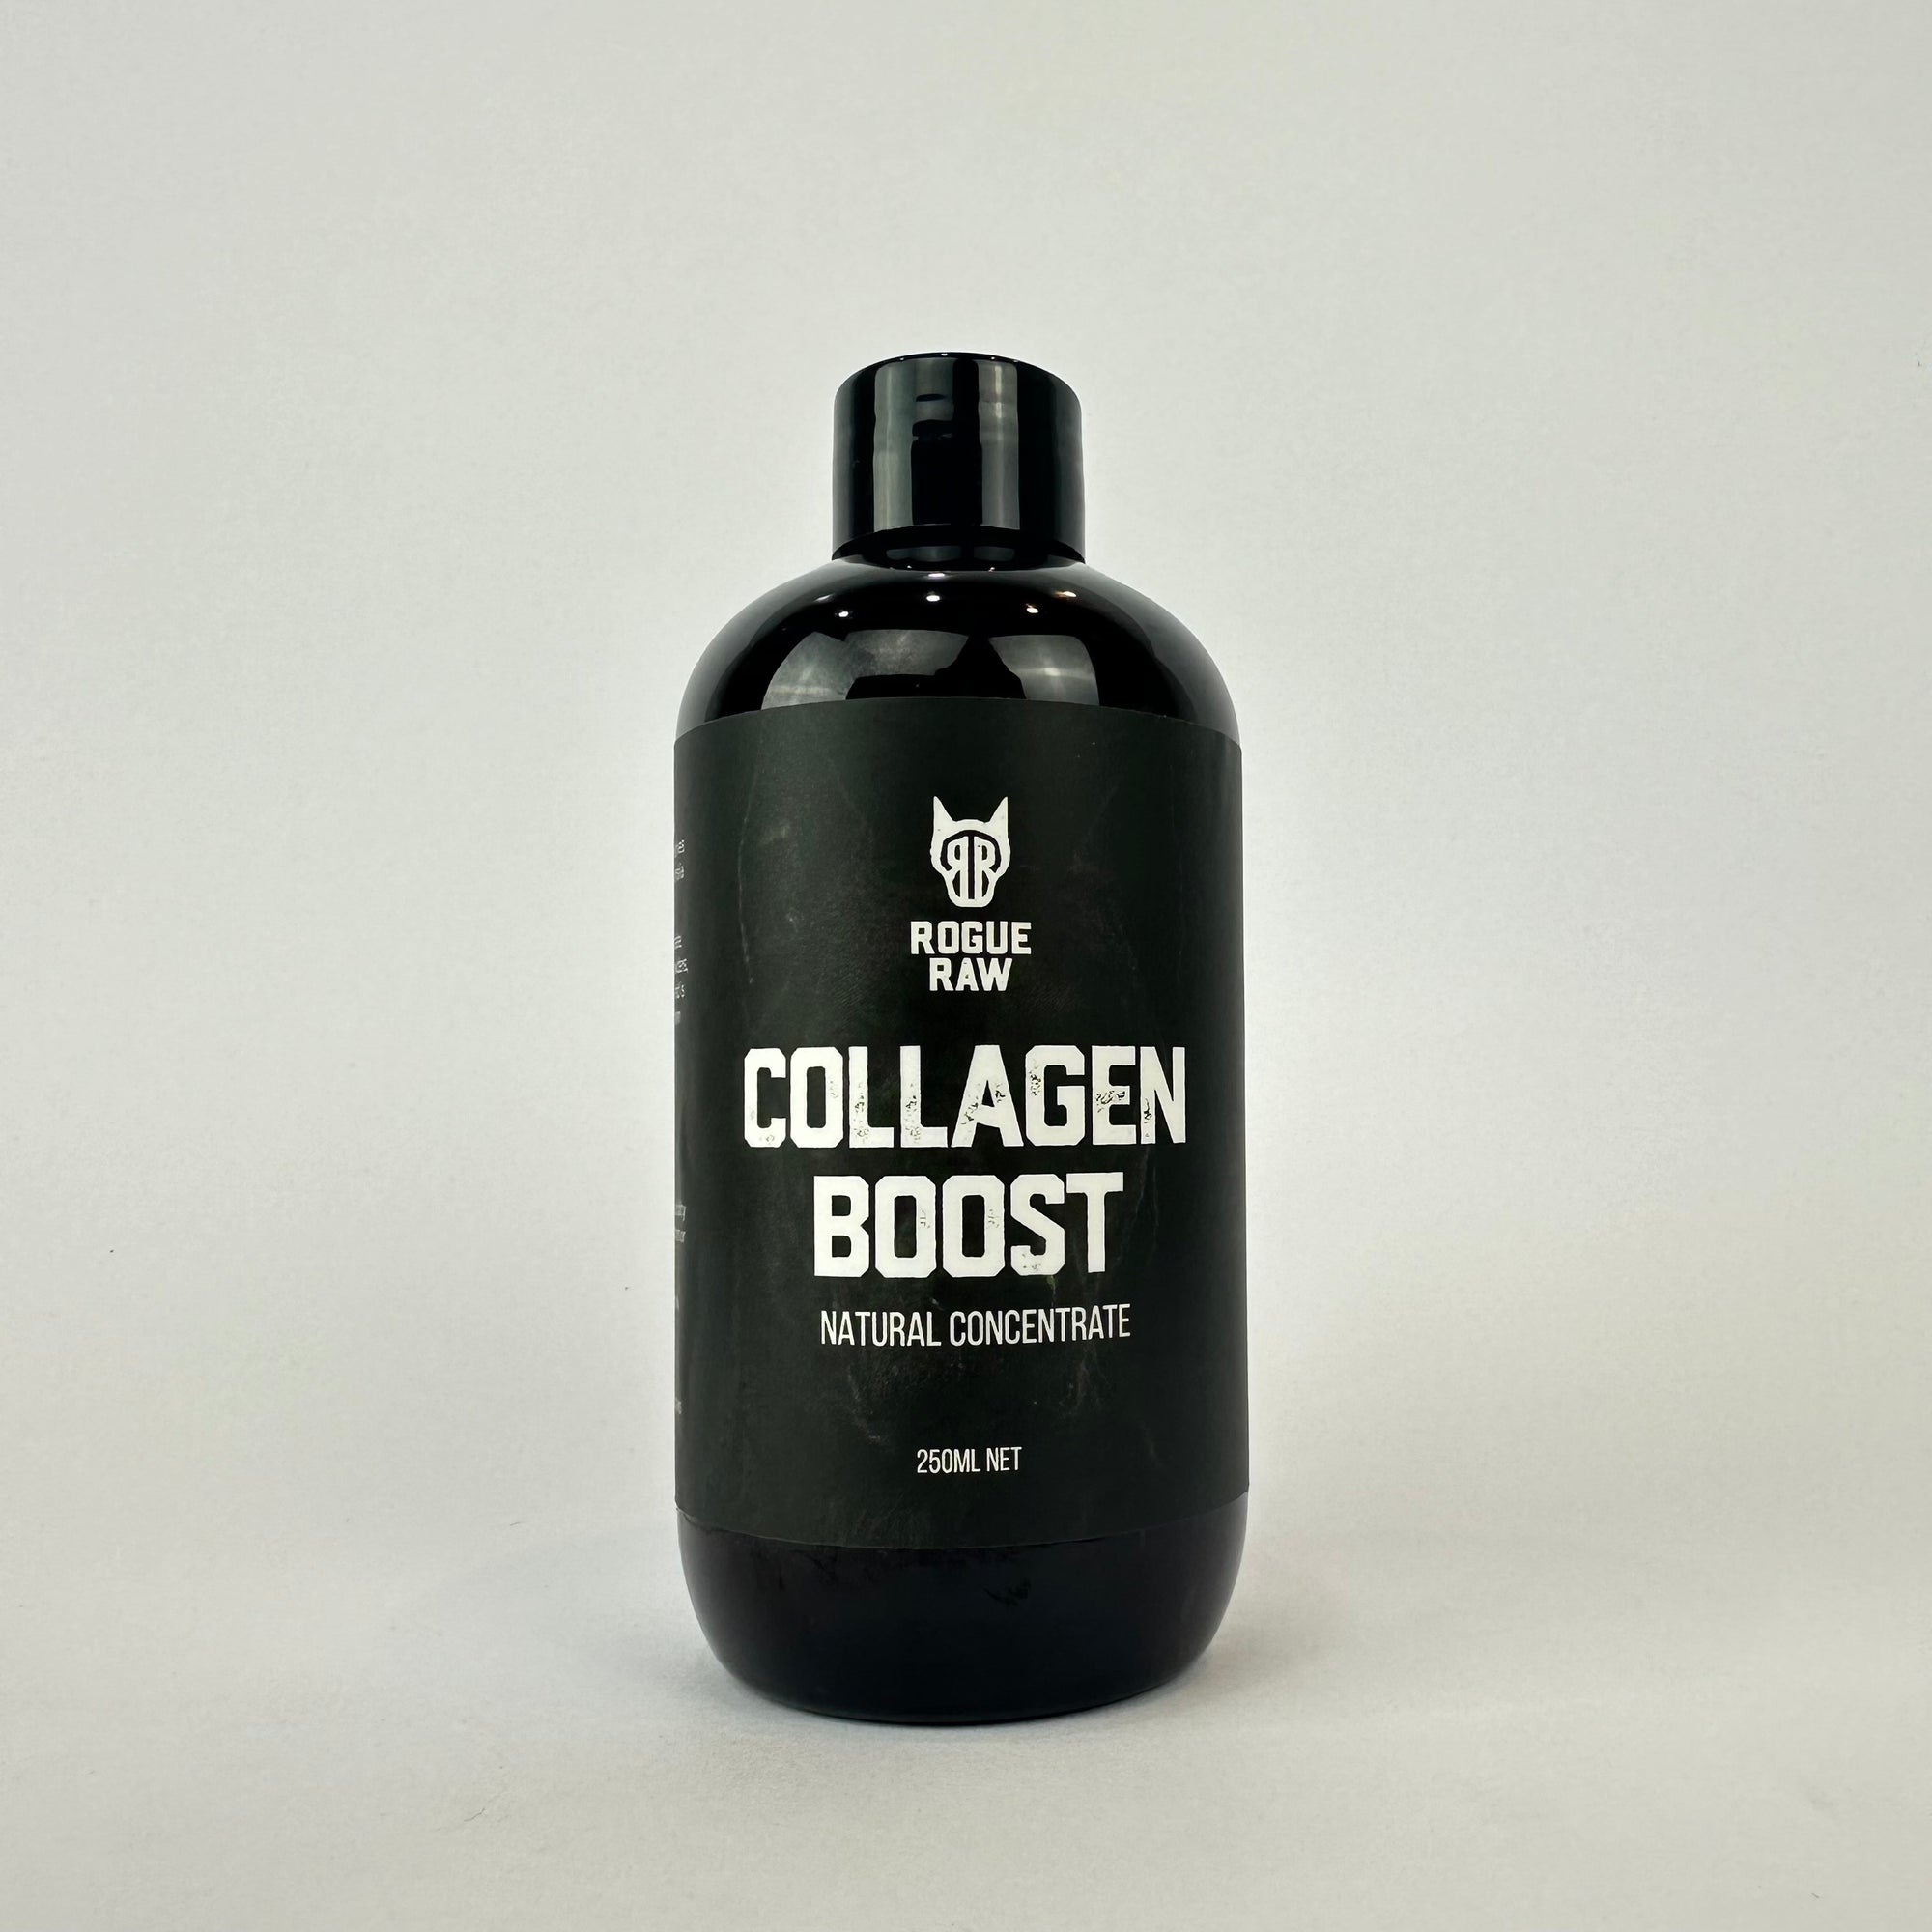 collagen boost oil for dogs and cats, chondroitin dog, joints